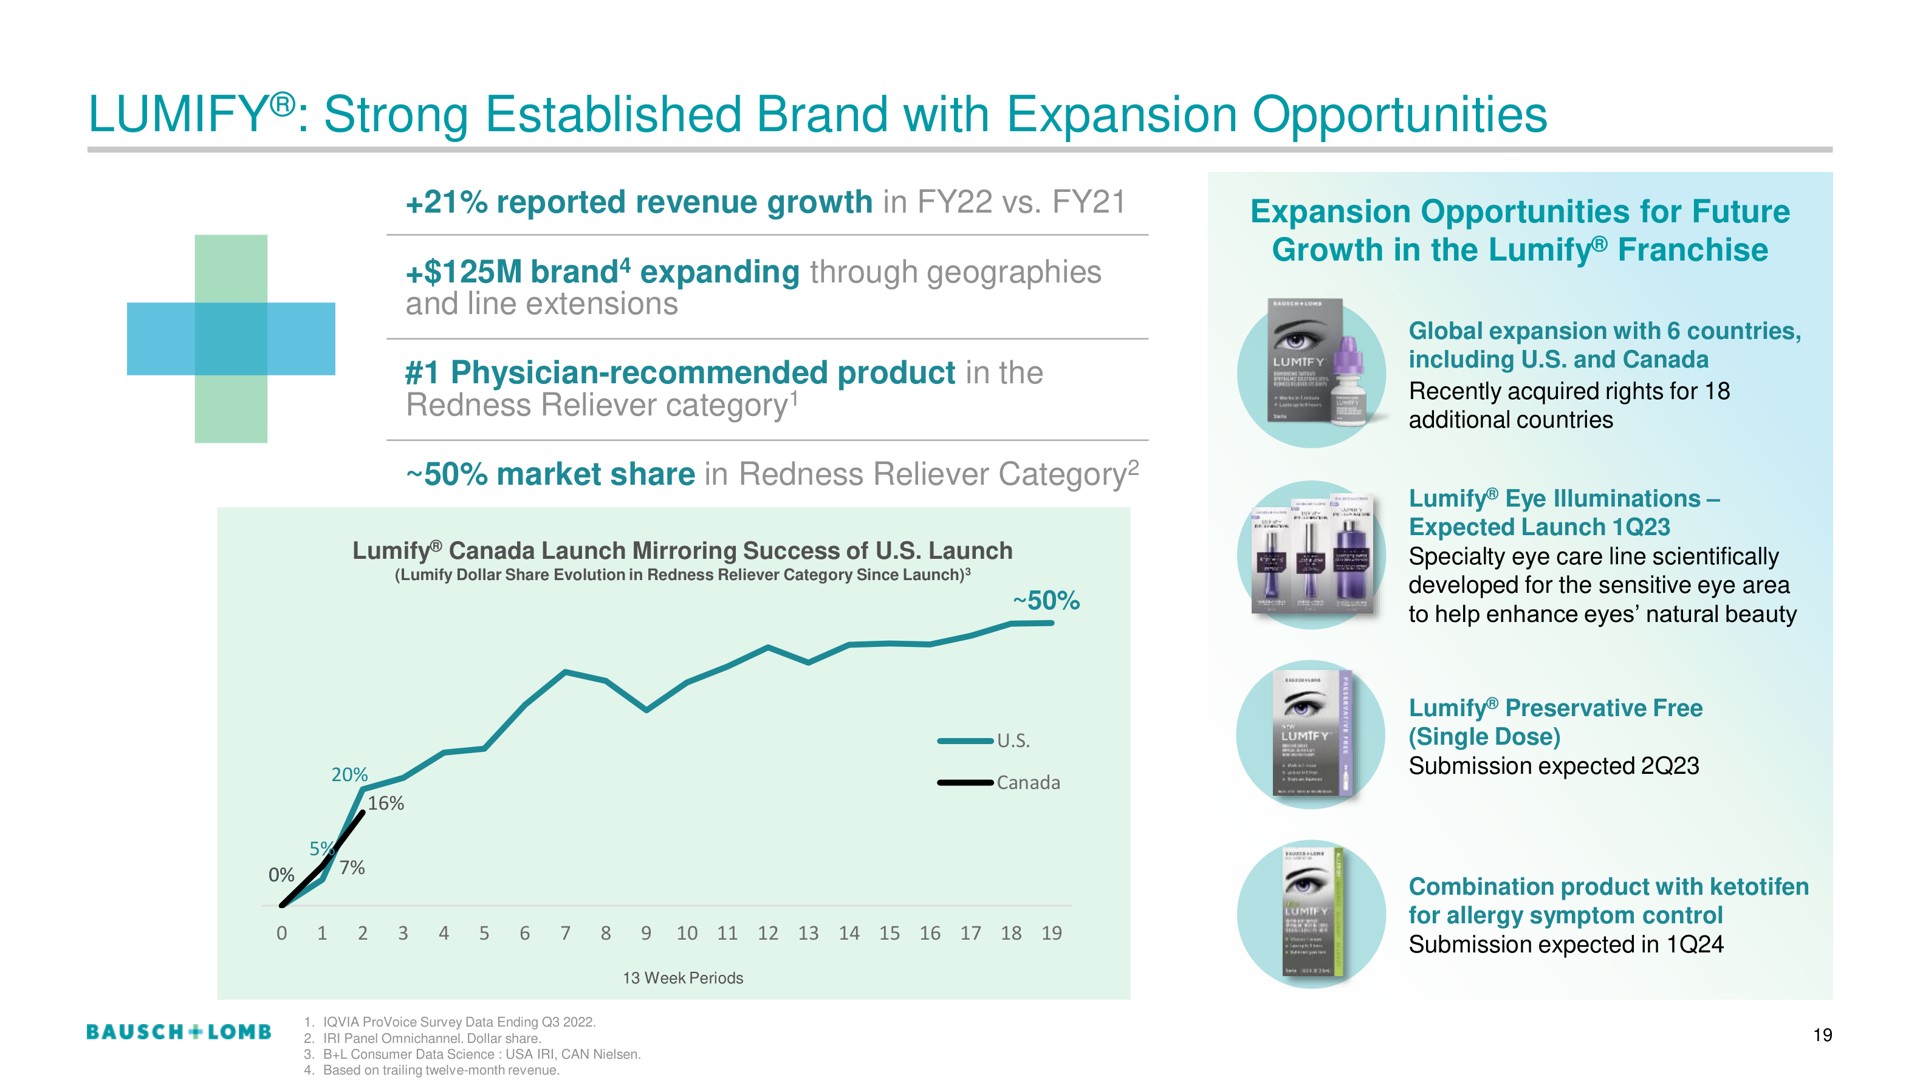 strong established brand with expansion opportunities | Bausch+Lomb